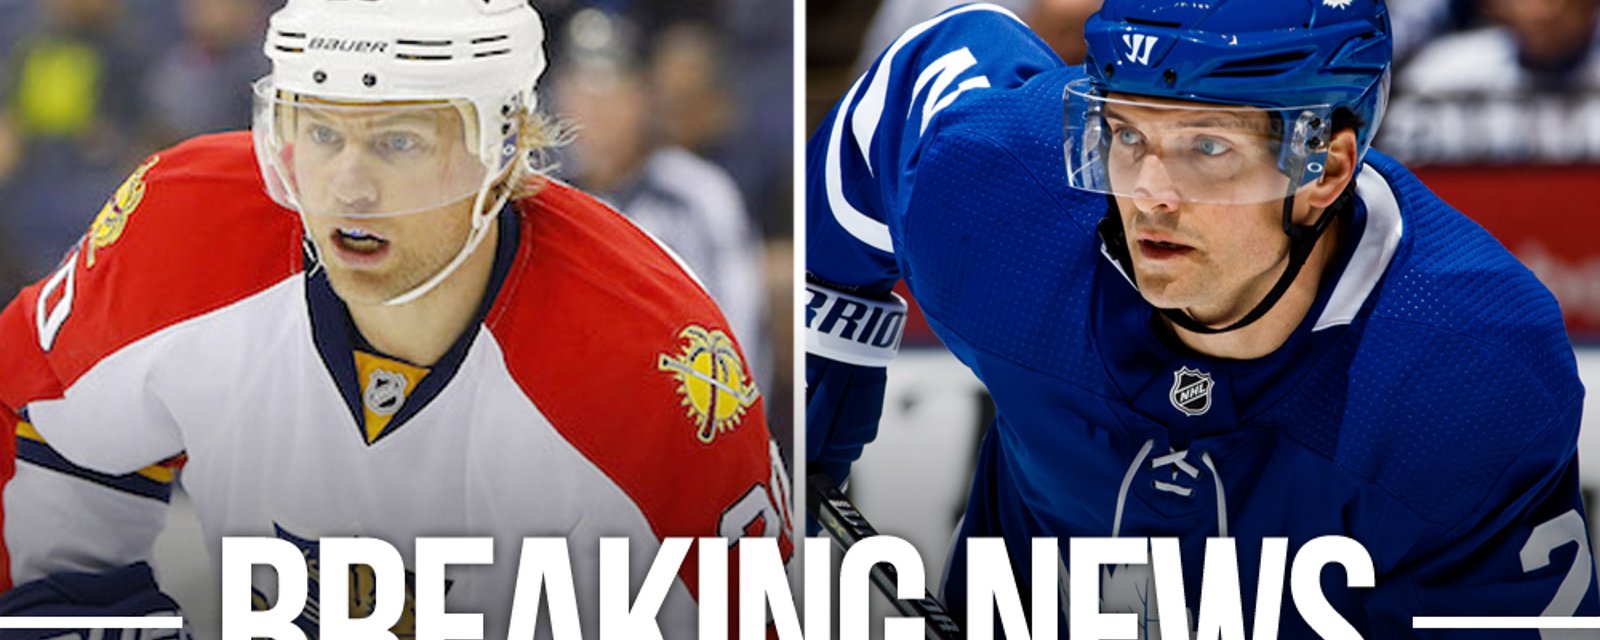 Former NHLers Hainsey and Bergenheim join the NHLPA